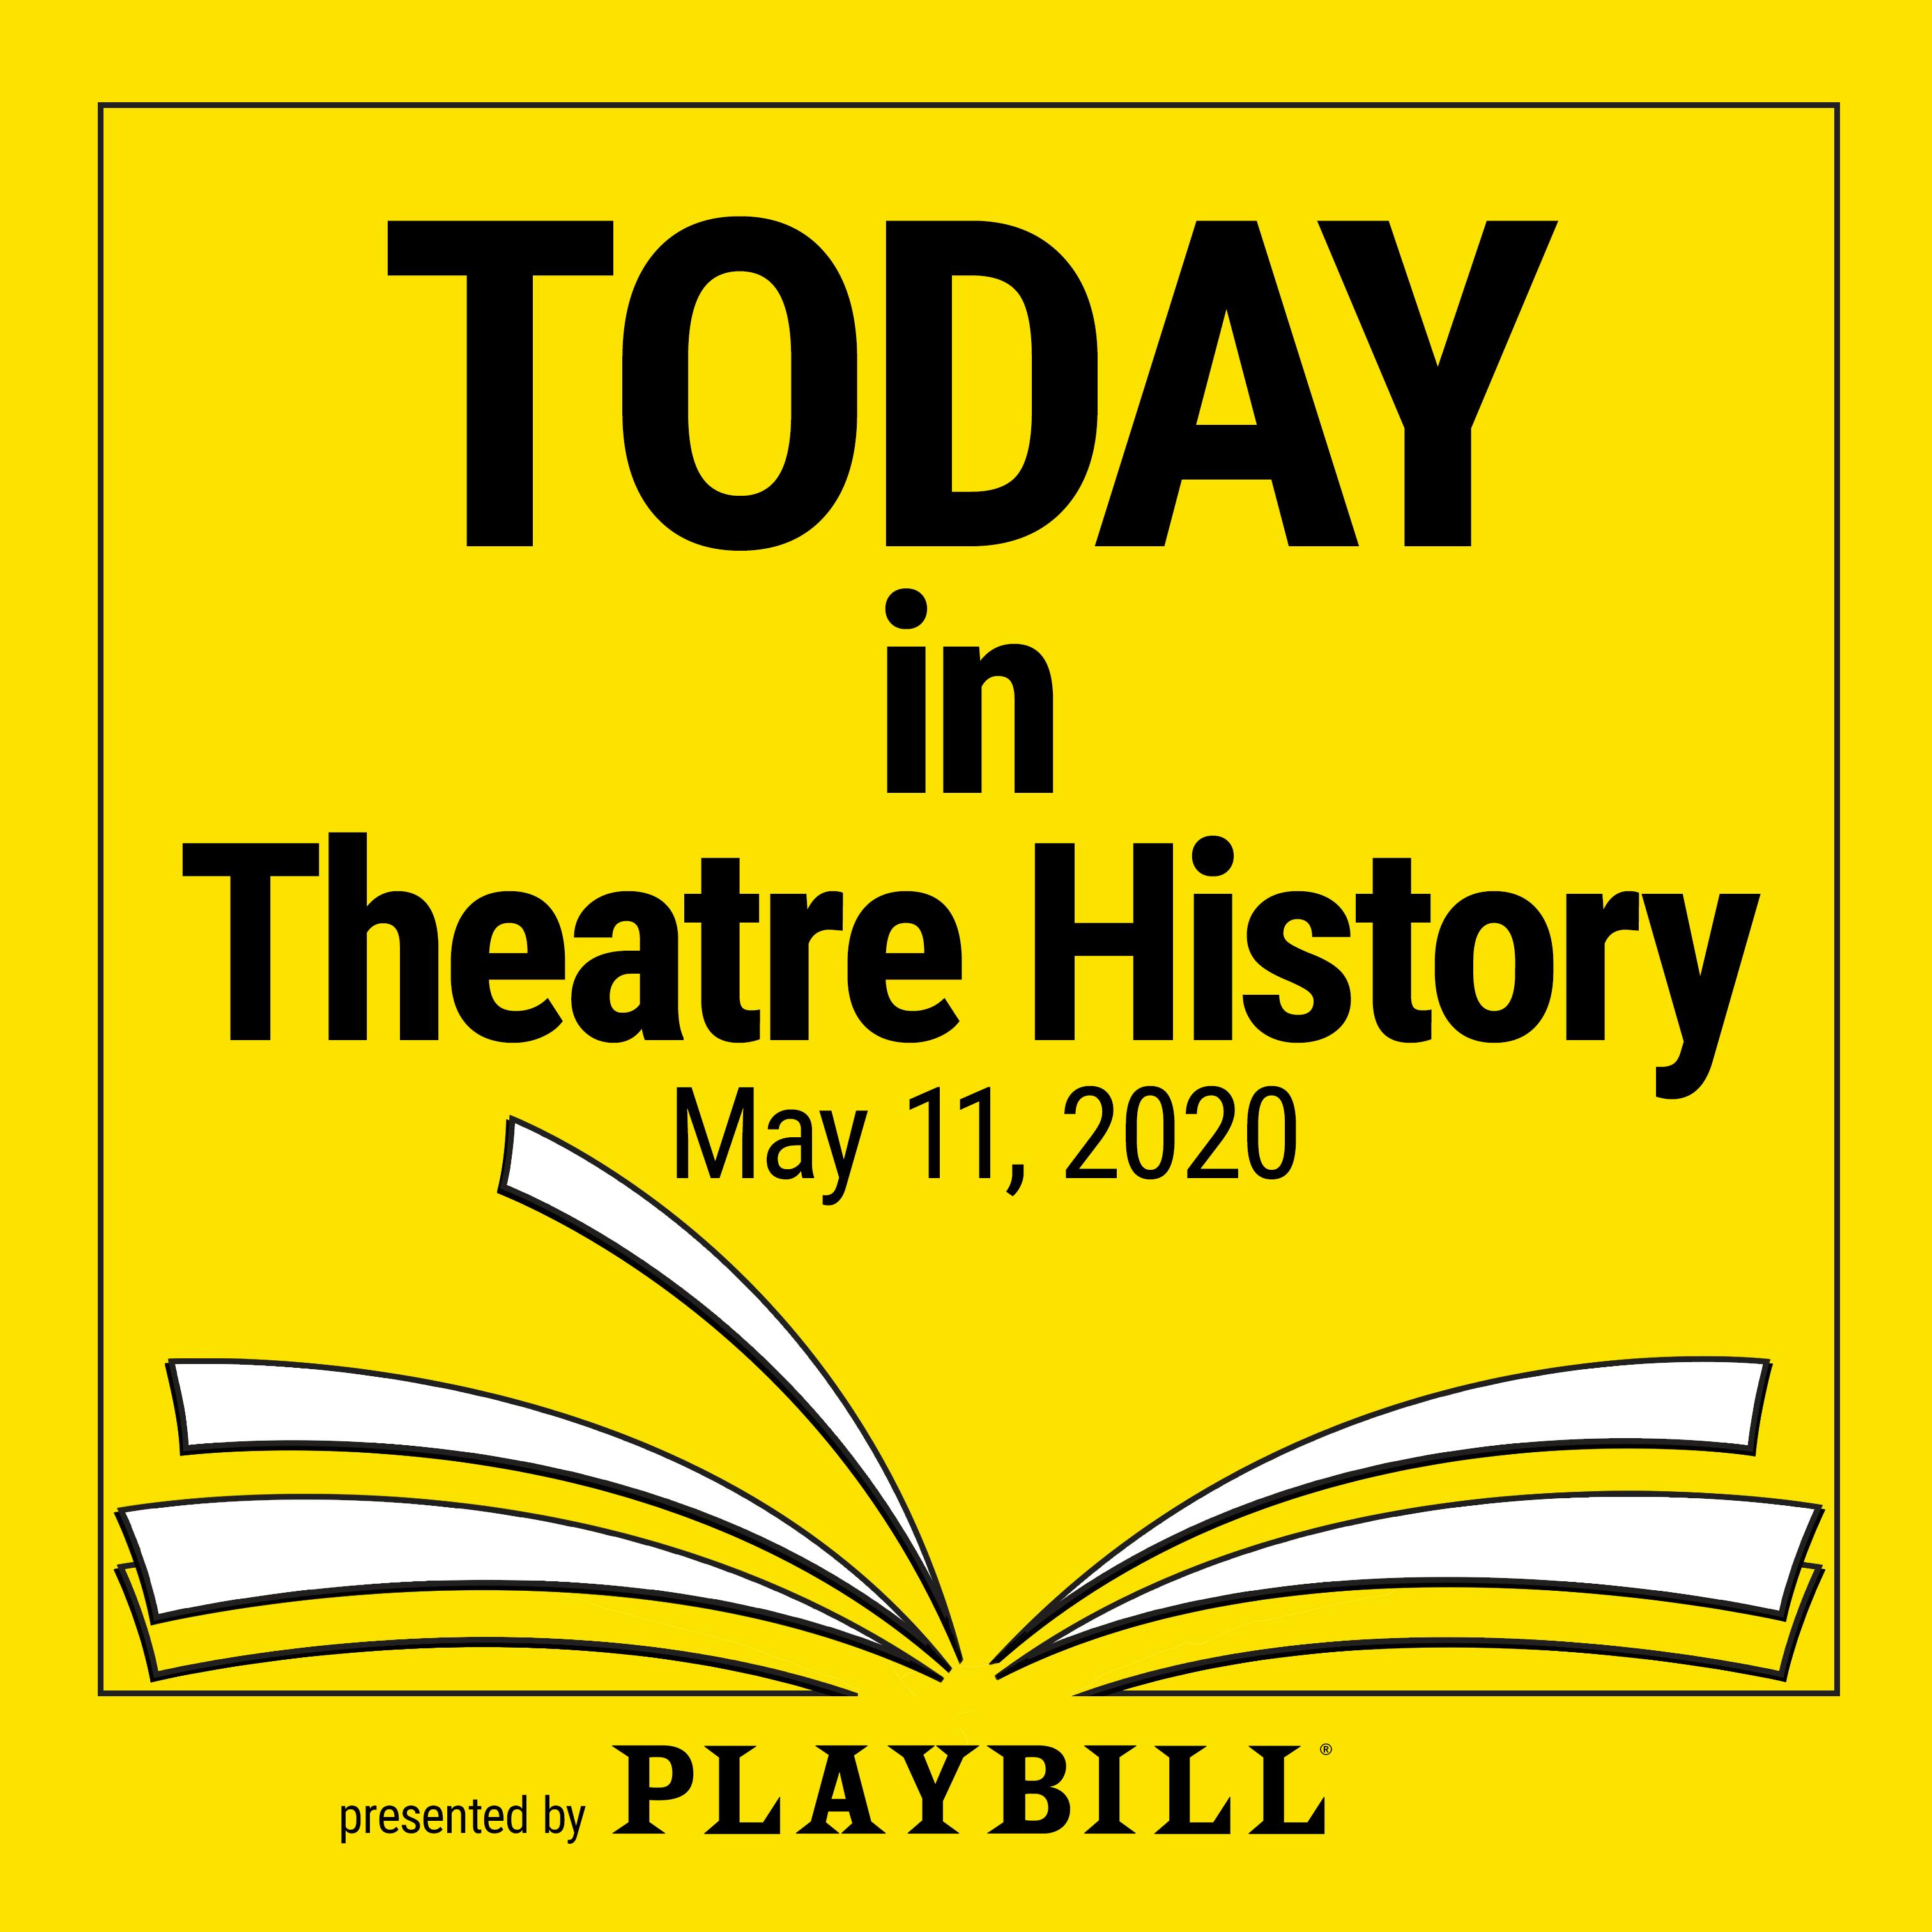 May 11, 2020: Liza Minnelli made her Broadway debut in 1965.